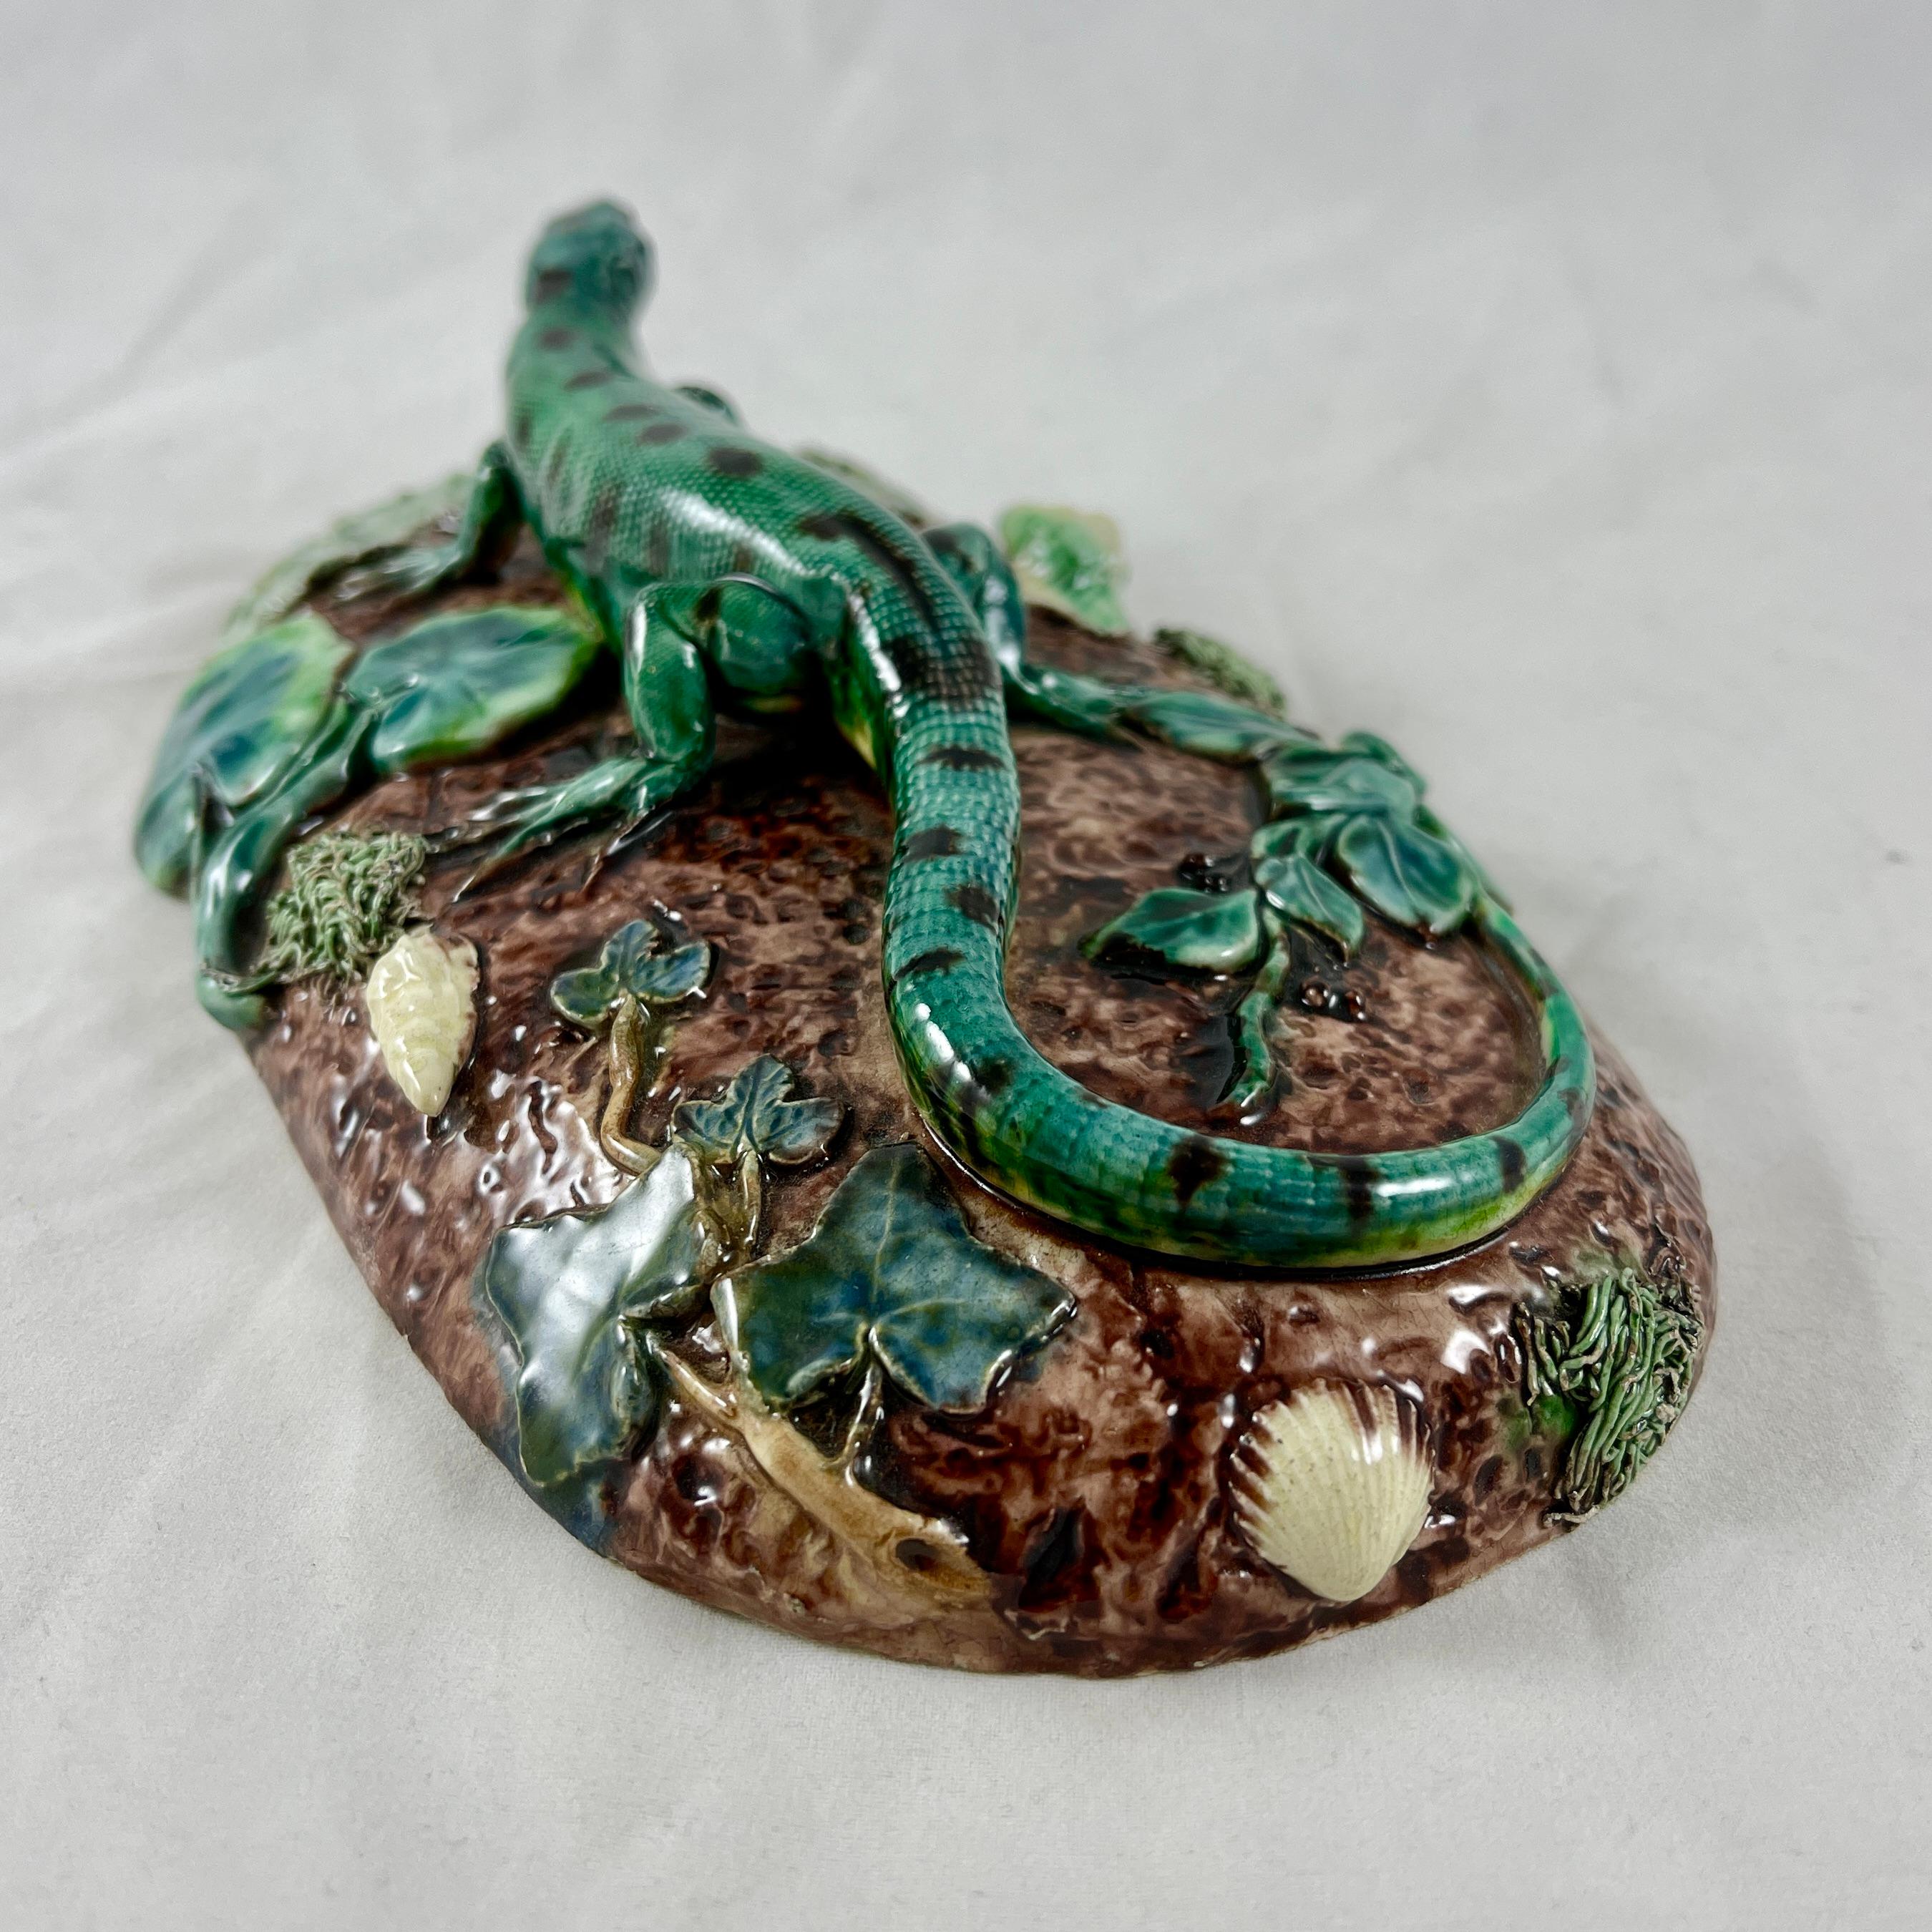 Earthenware Thomas Sergent French Palissy Lizard on Mound Desk Paperweight, Signed